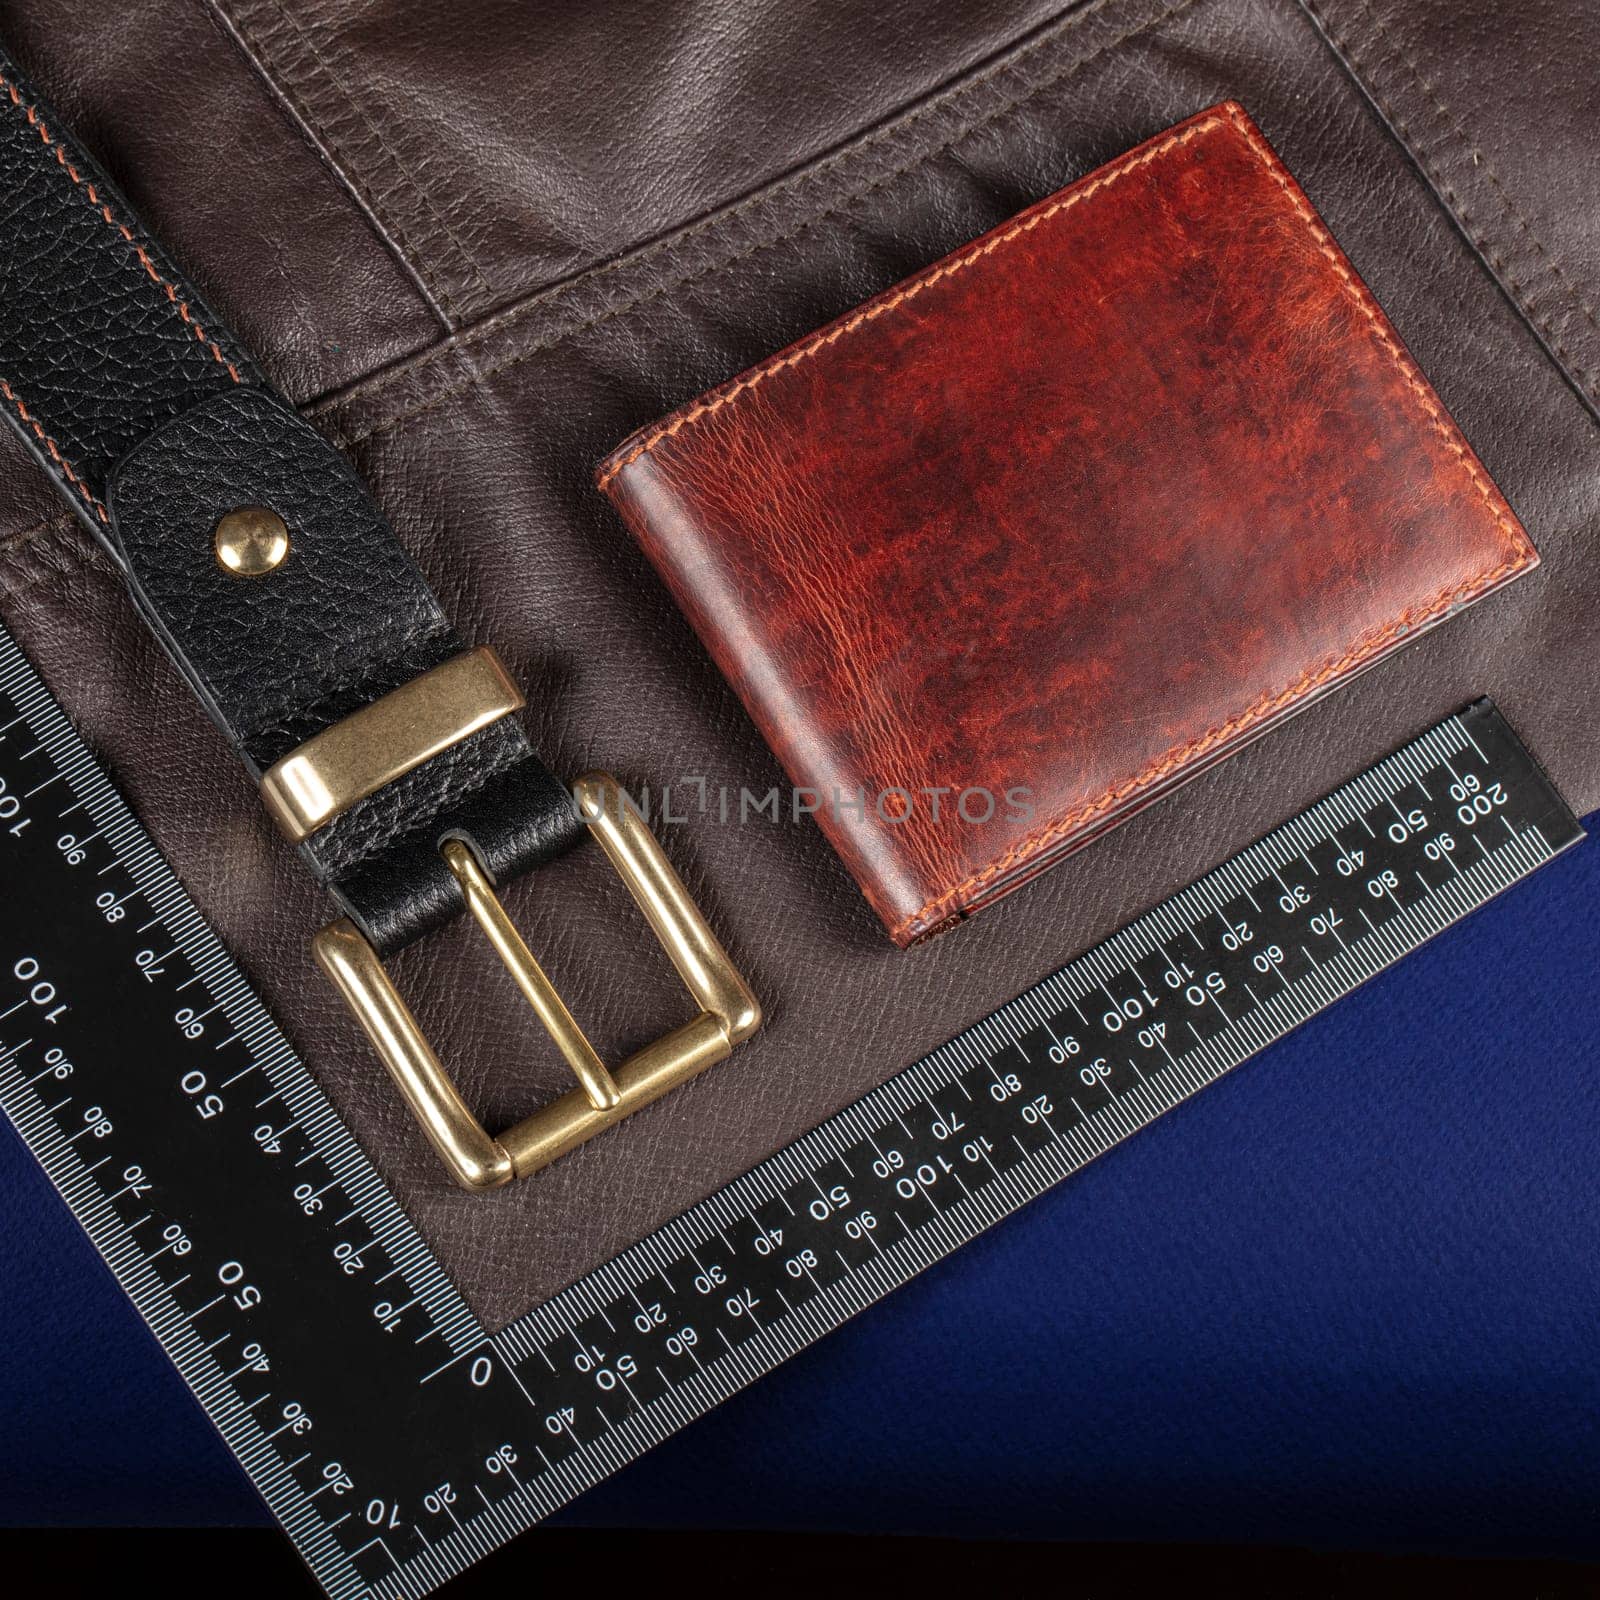 Leather goods purse and belt against the background of a ruler for cutting and sewing. by Sviatlana